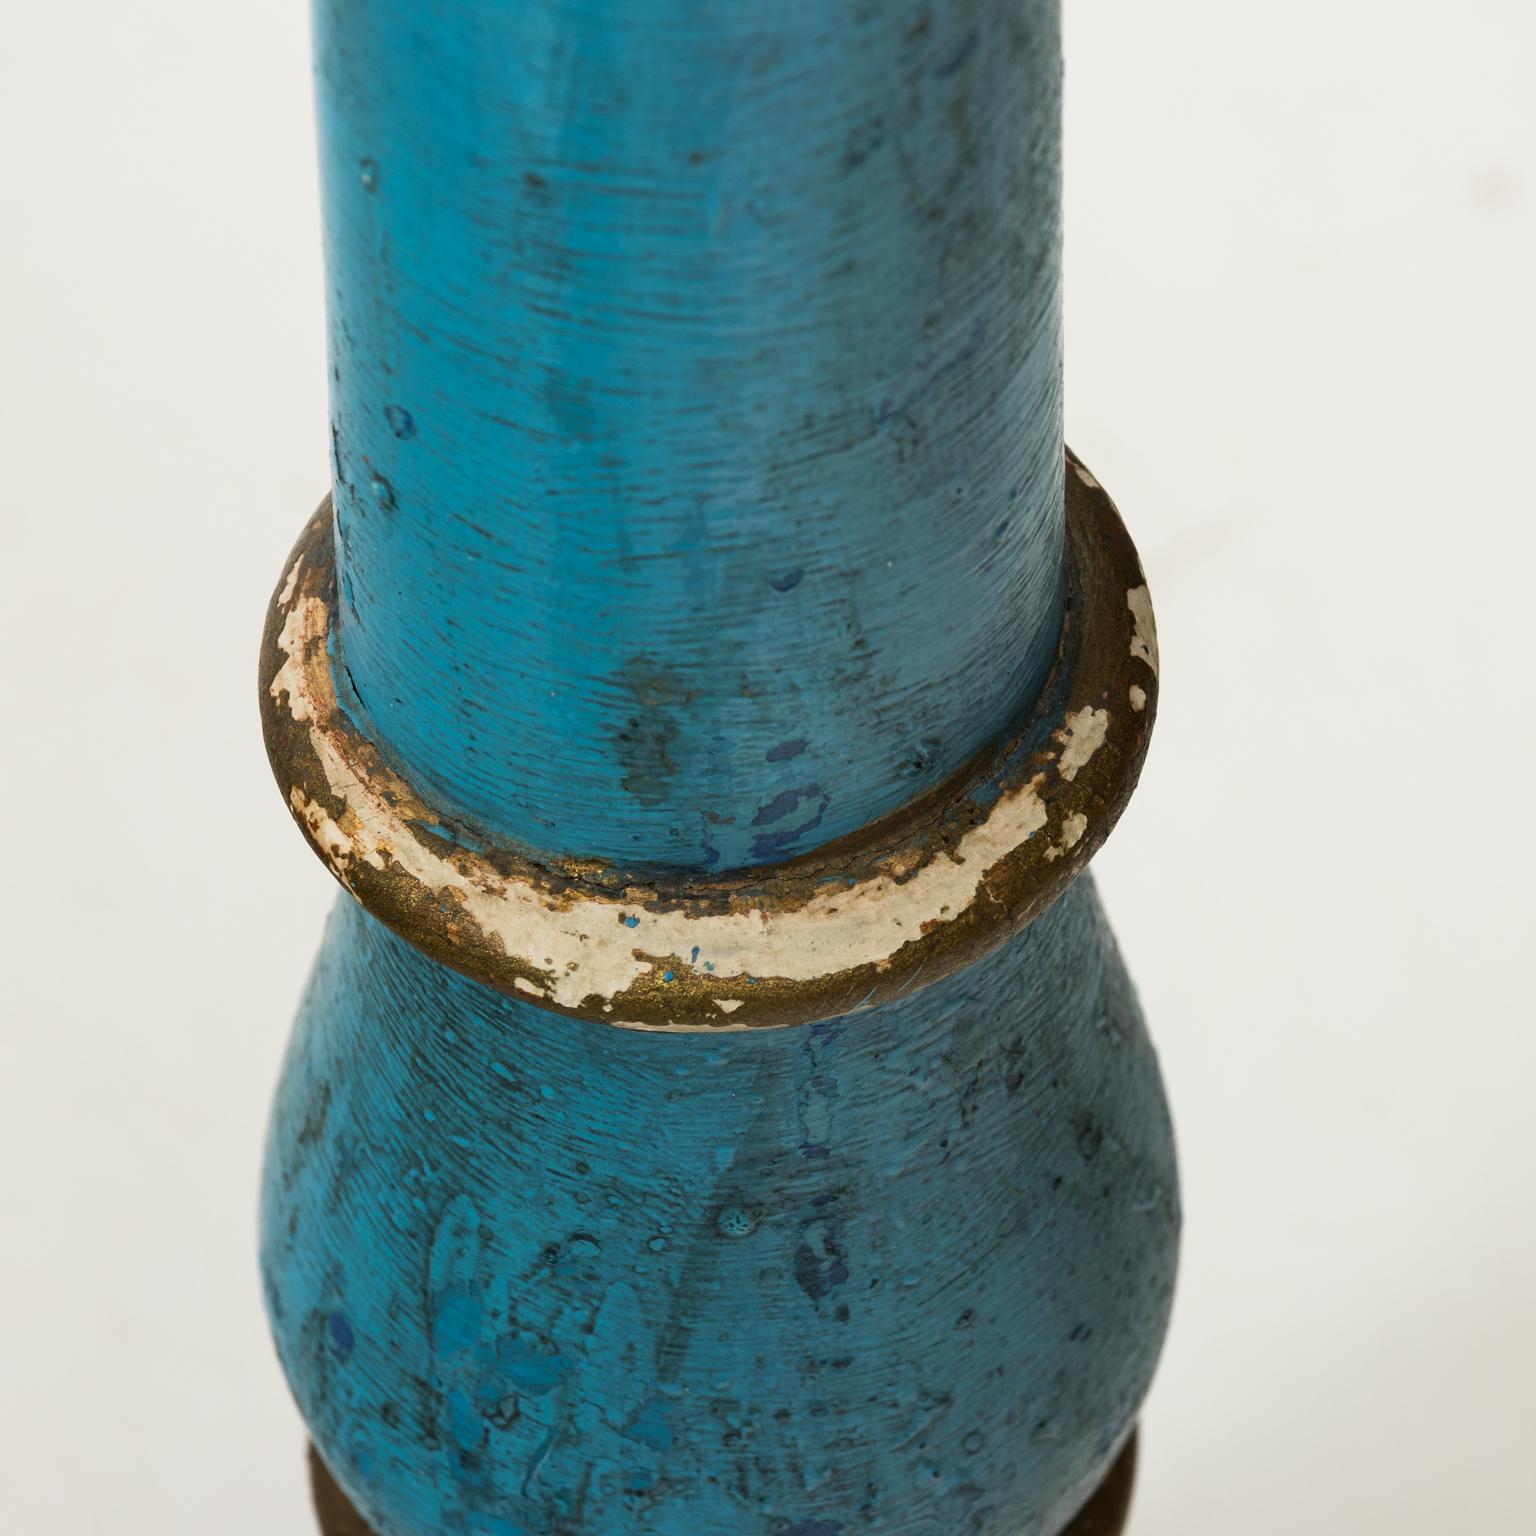 19th century Gustavian blue painted wooden candlesticks with gilded details.
 